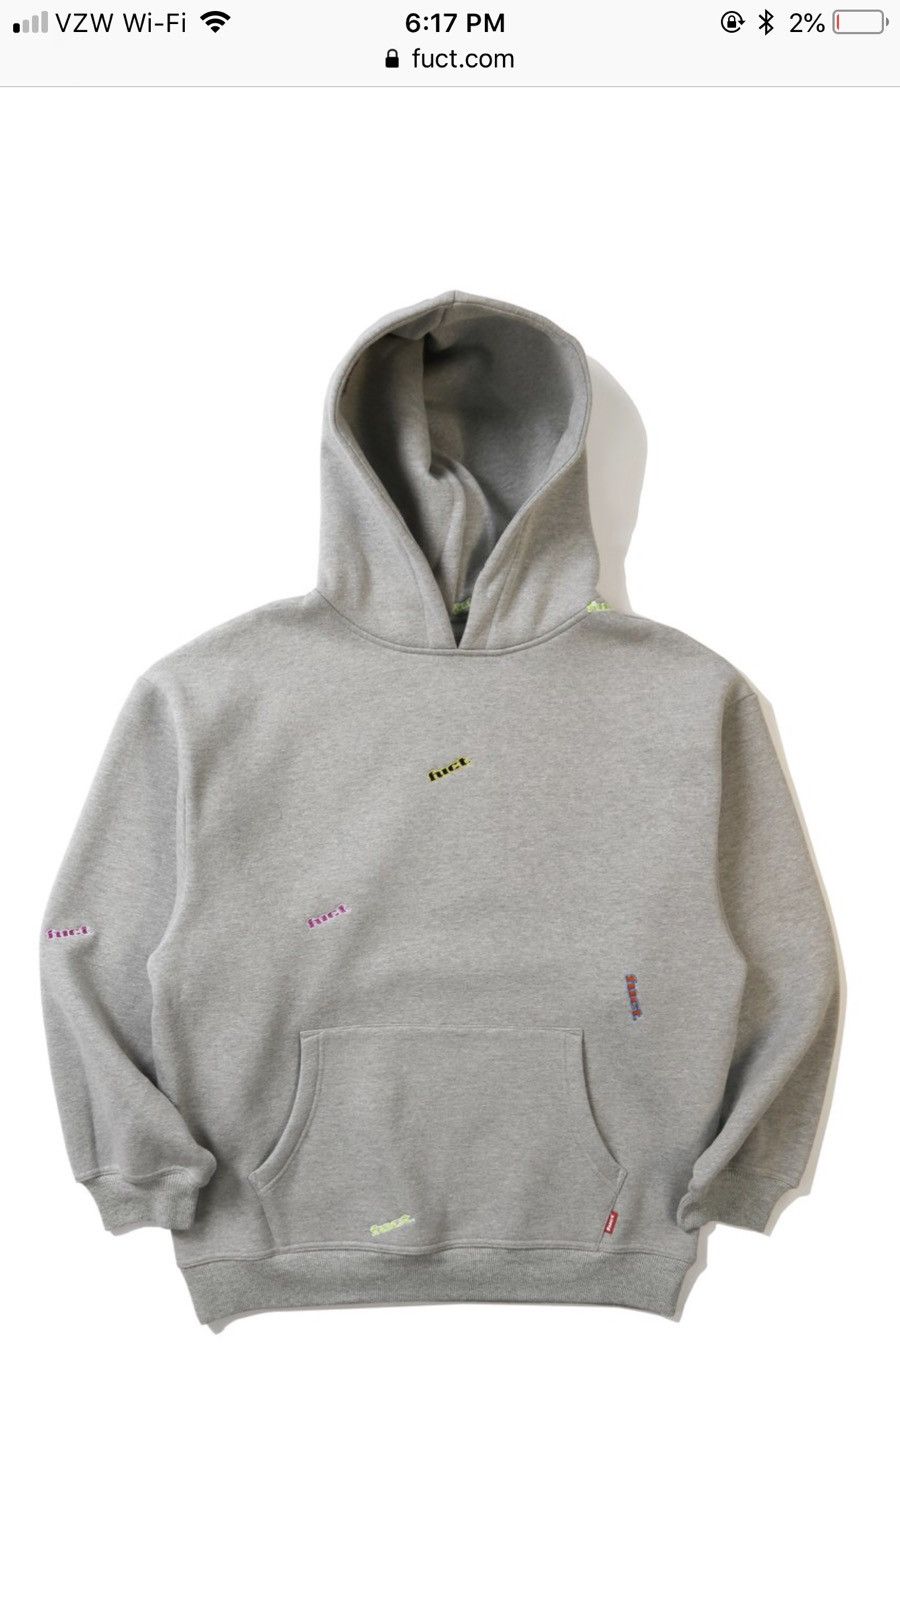 Fuct FUCT All Over Embroidered hoodie- Heather Gray Large Size US L / EU 52-54 / 3 - 1 Preview